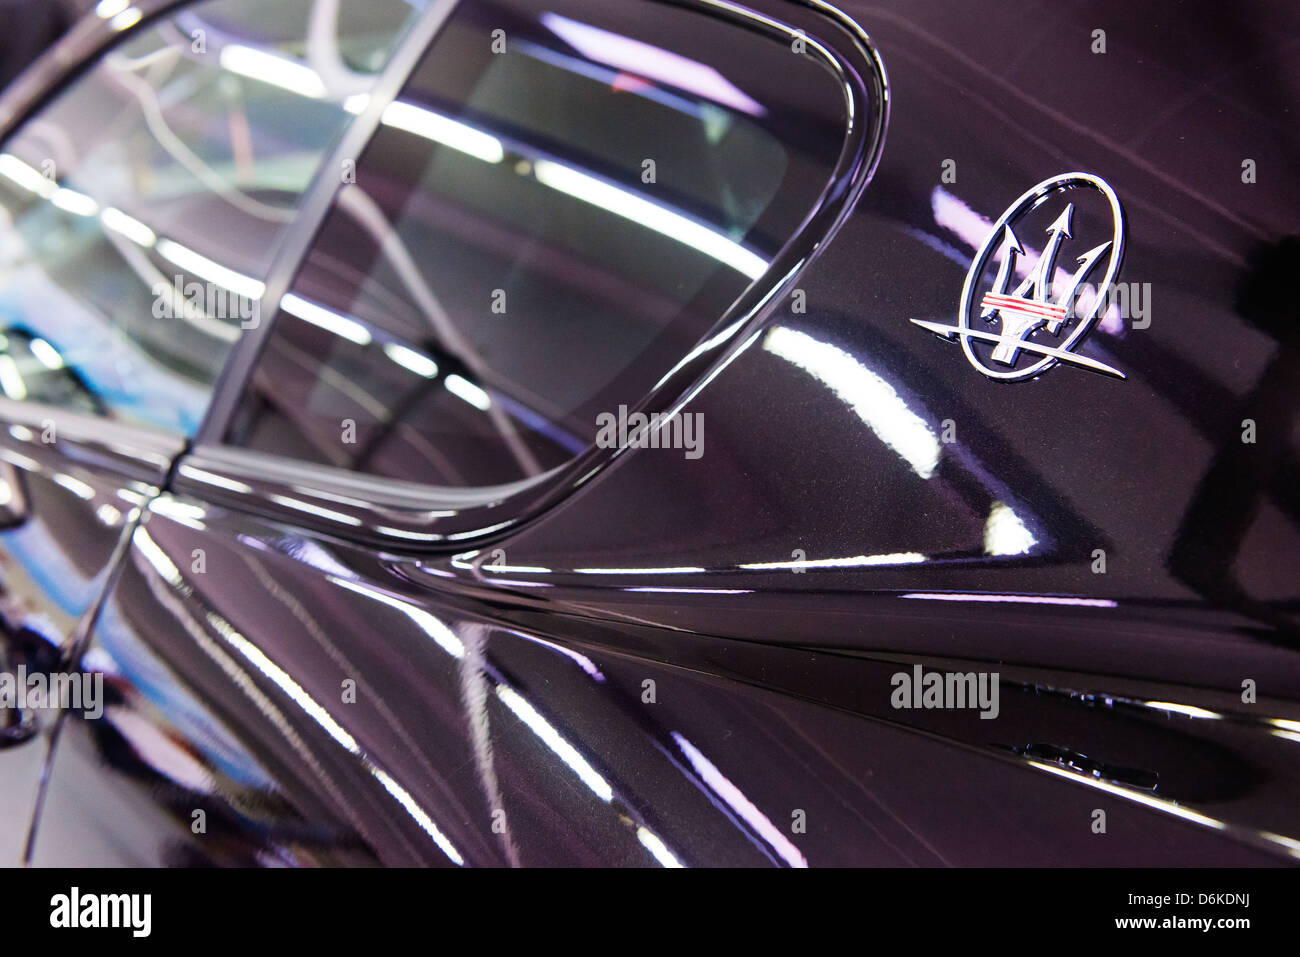 A particular of Maserati Luxury car Stock Photo